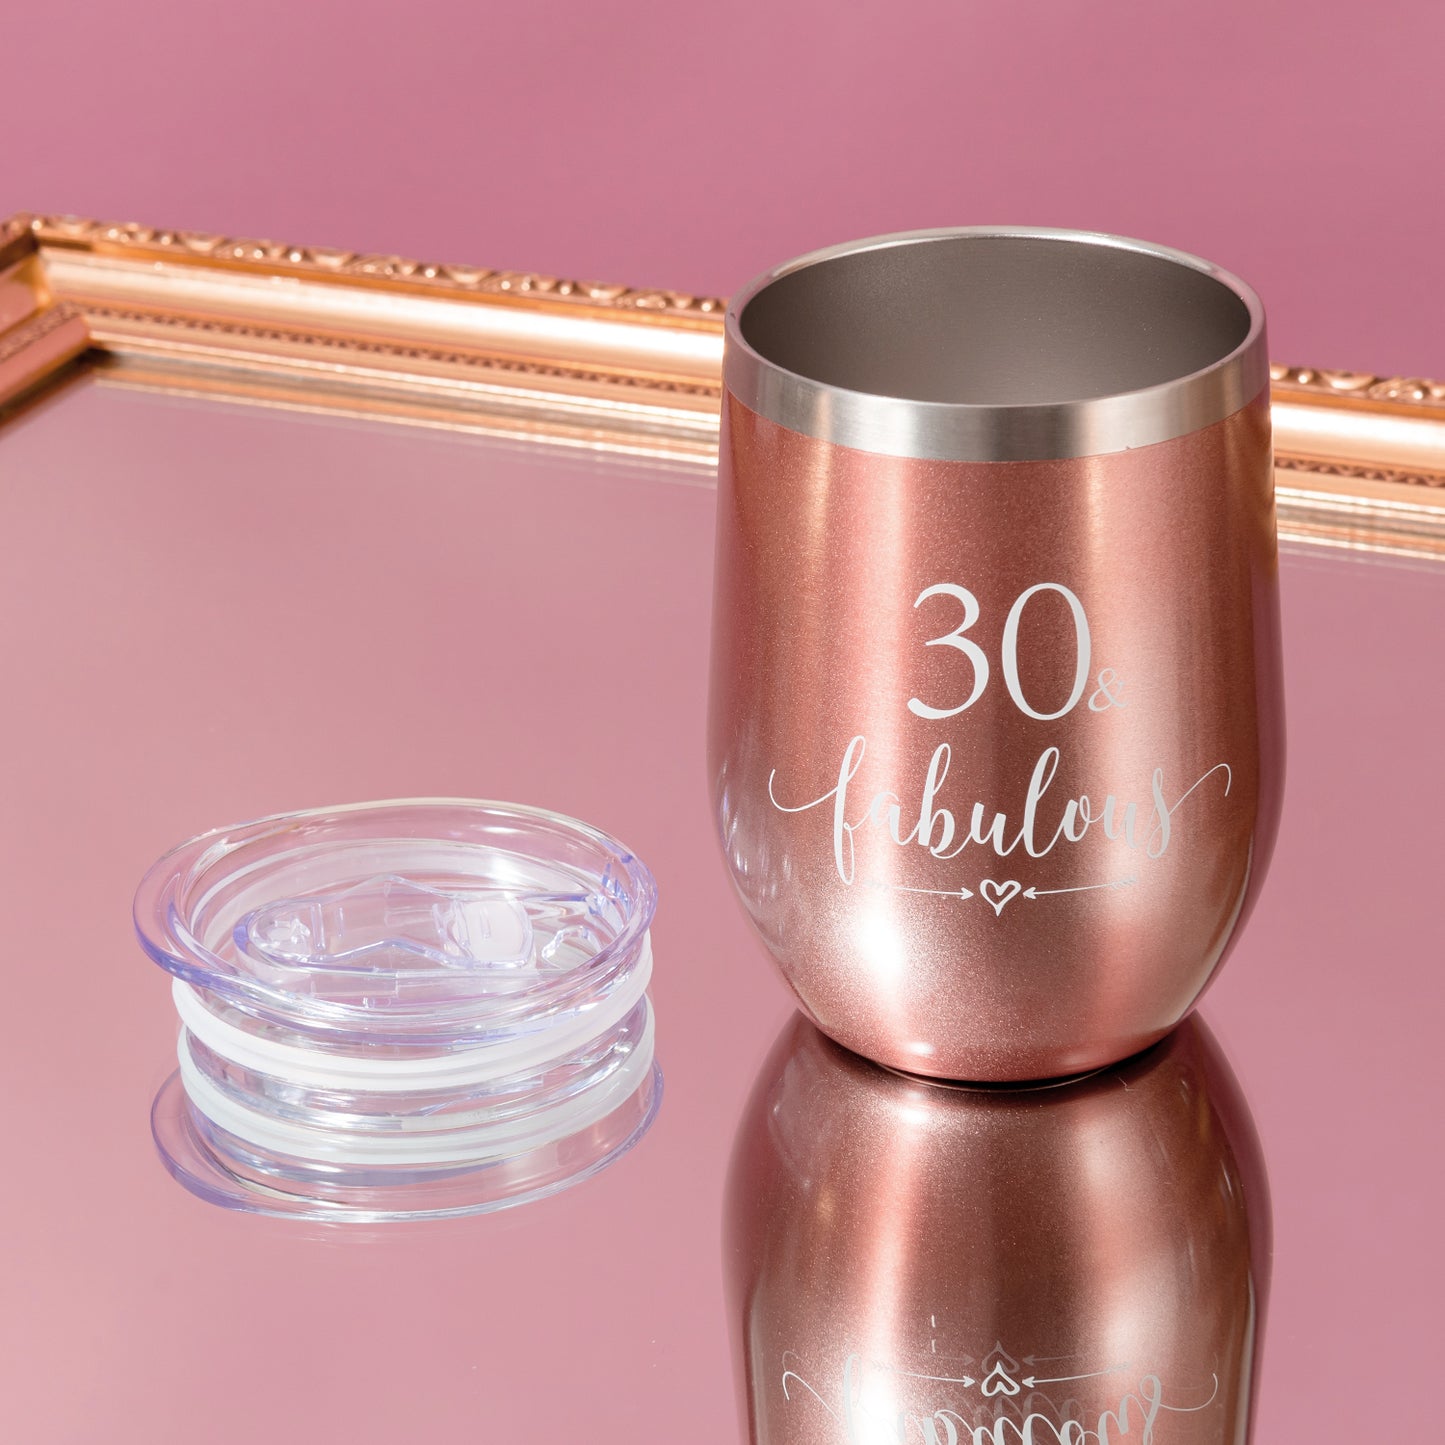 Crisky Rose Gold 30 & Fabulous Wine Tumbler for Women 30th Birthday Gifts for Women, Wife, Mom, Sister, Aunt, Friends, Coworker Her, Vacuum Insulated Coffee Cup,12oz with Box, Lid, Straw